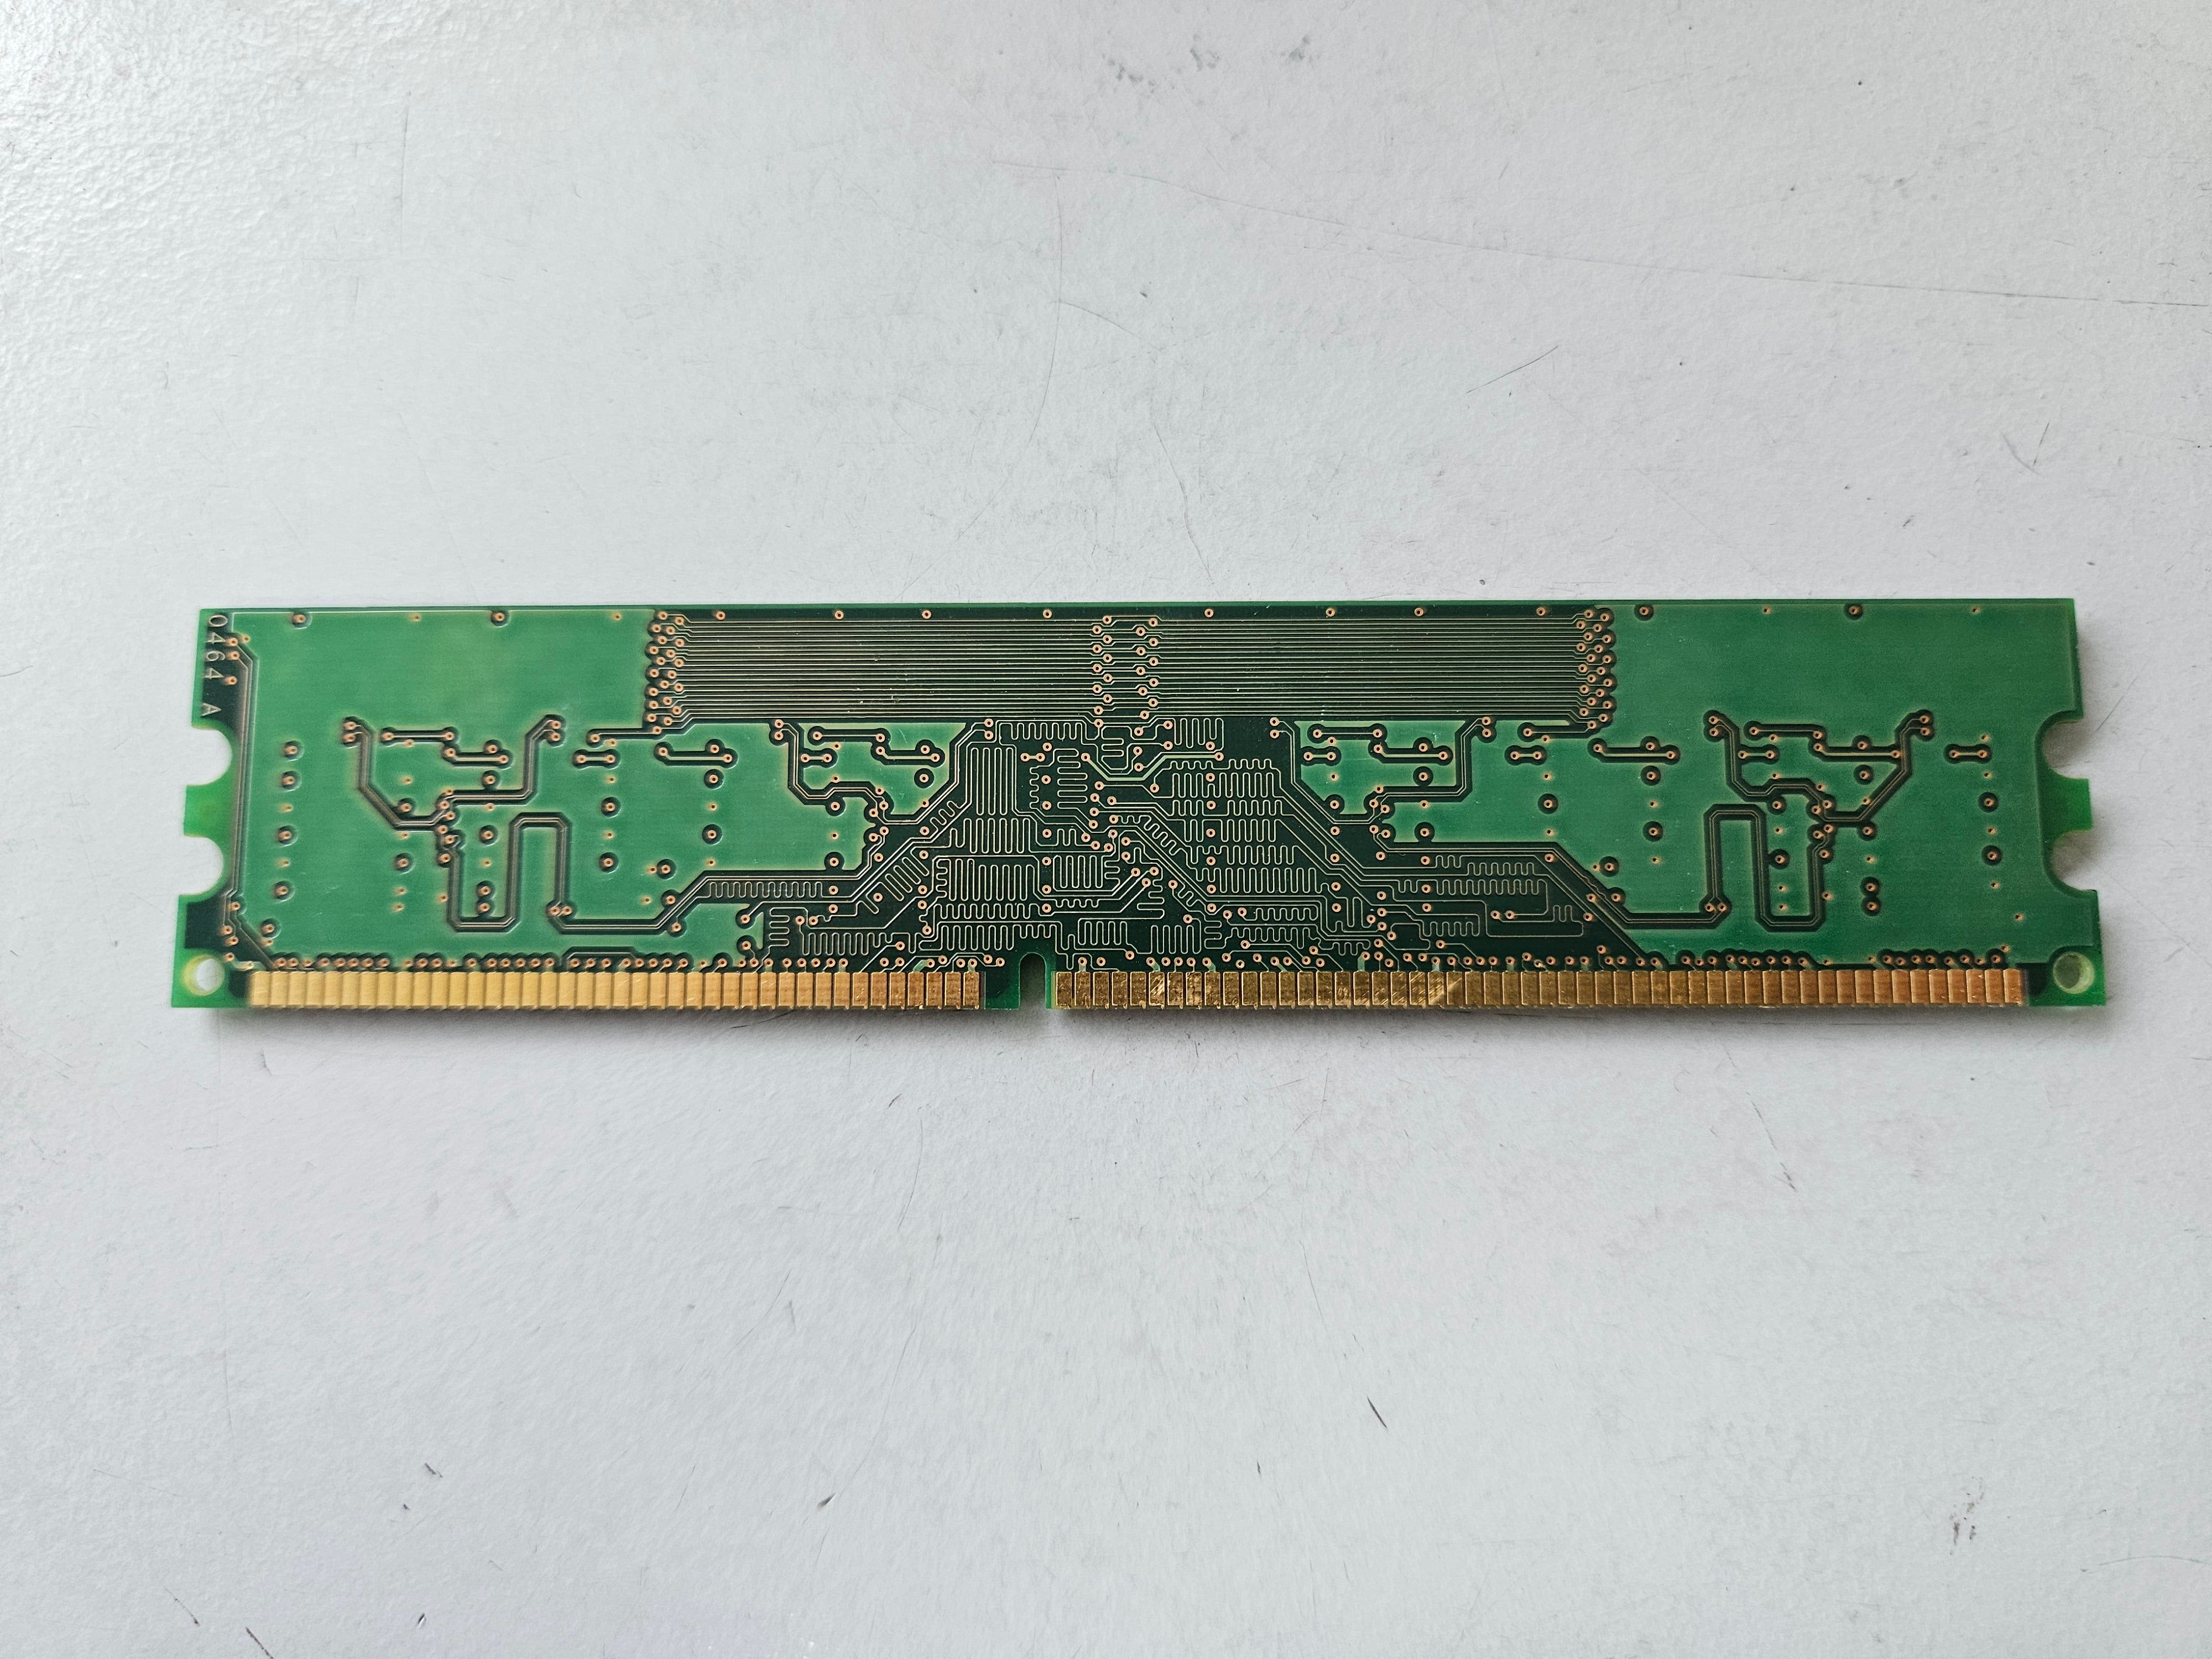 Micron Crucial 512MB DDR-333MHz PC2700 CL2.5 184-Pin UDIMM ( MT8VDDT6464AY-335D3 CT6464X335.8TDY ) REF